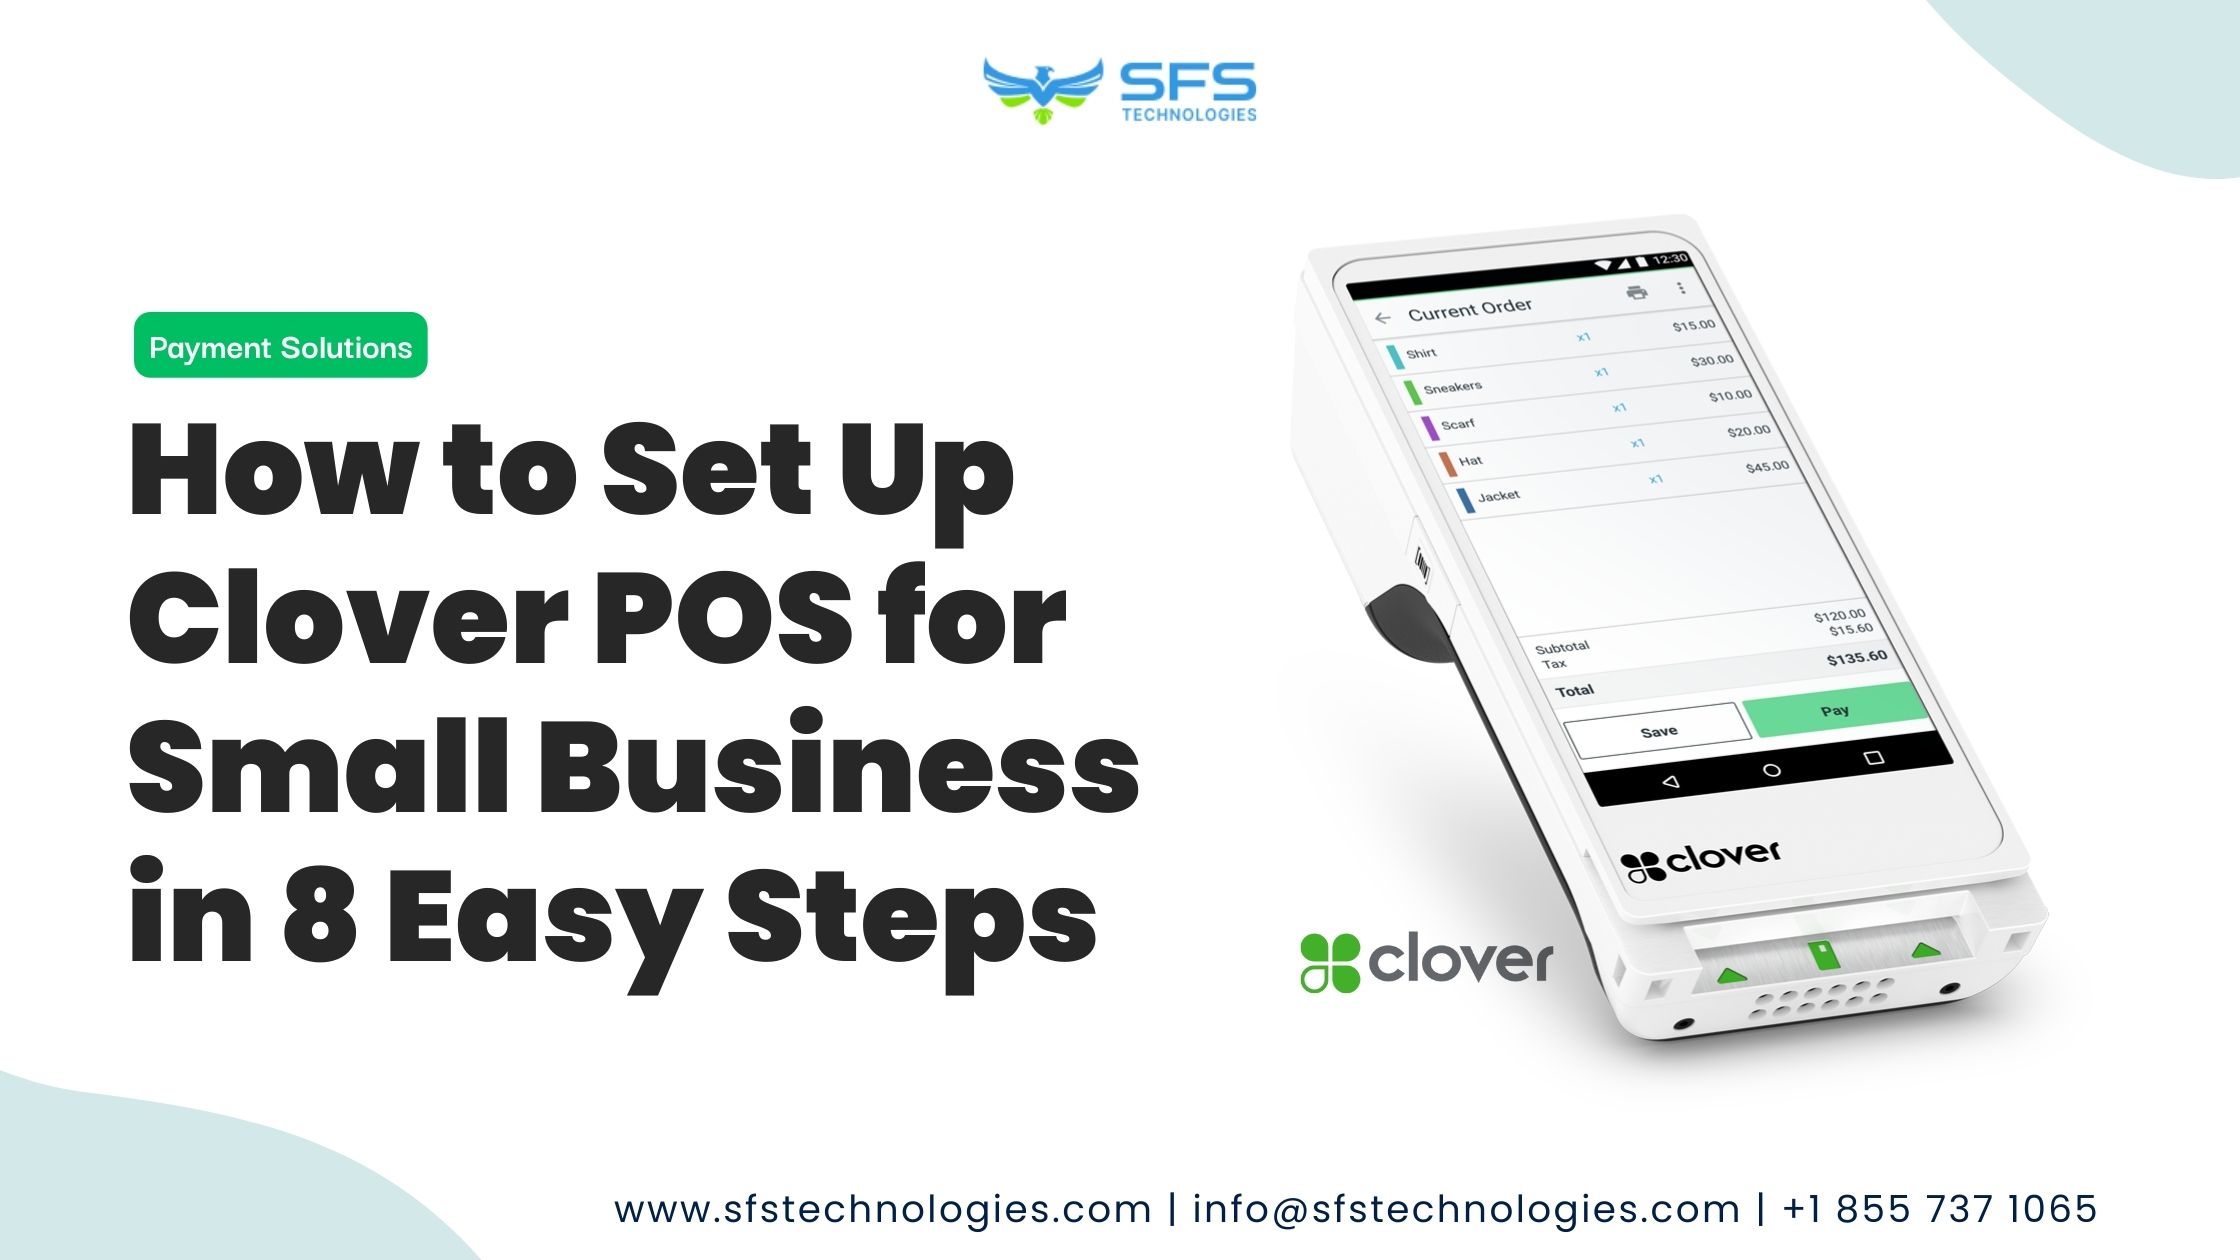 Clover POS for Small Business